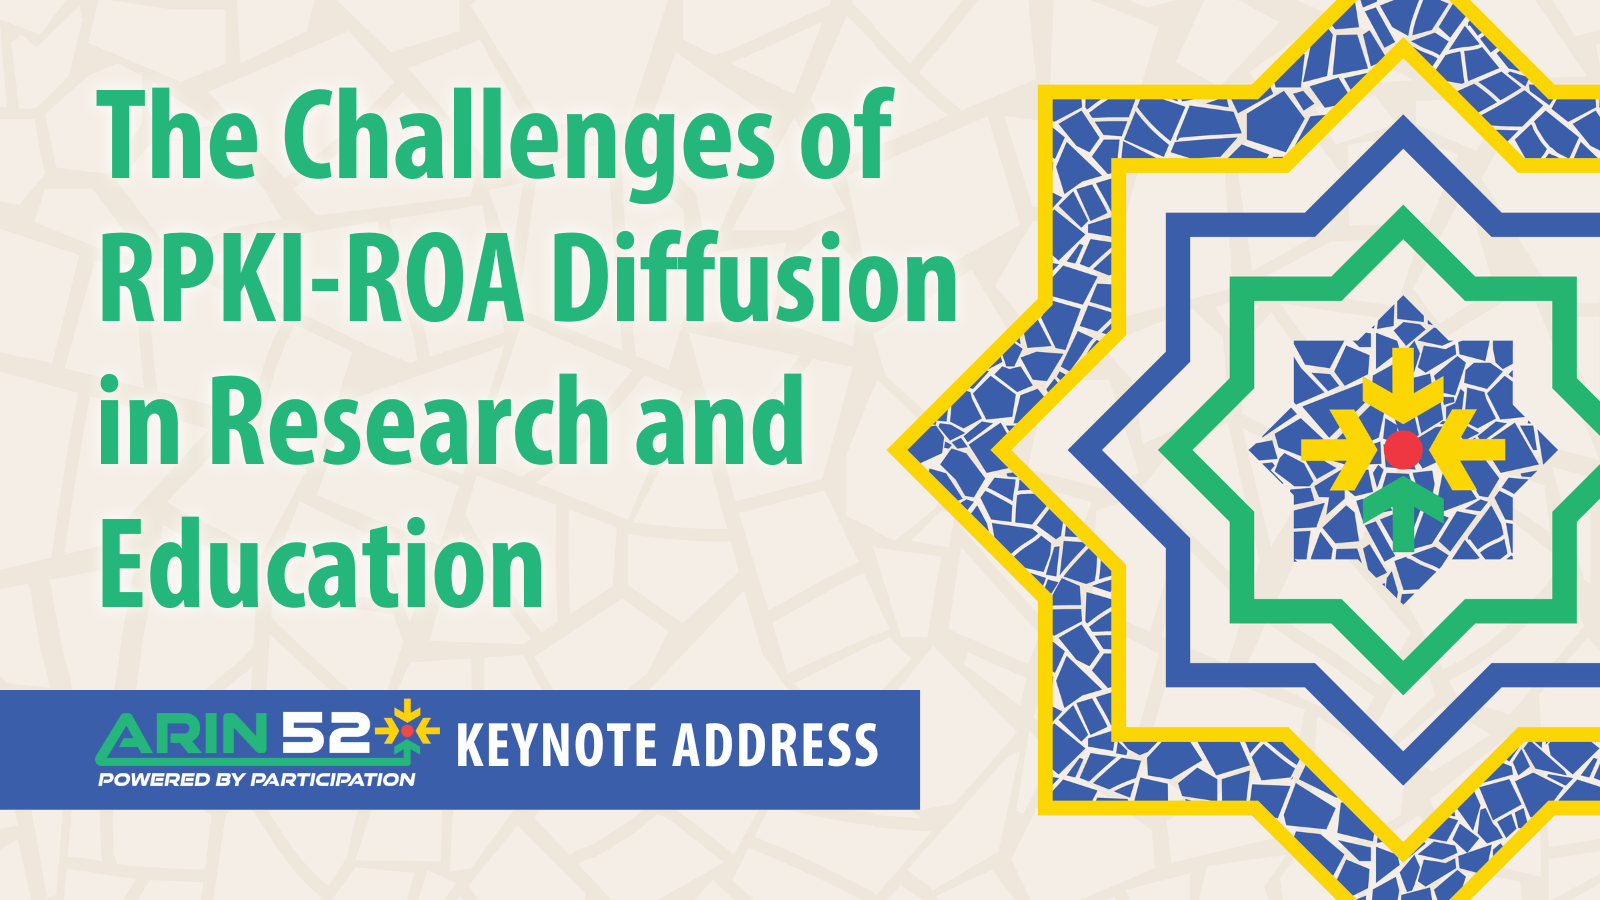 The Challenges of RPKI-ROA Diffusion in Research and Education